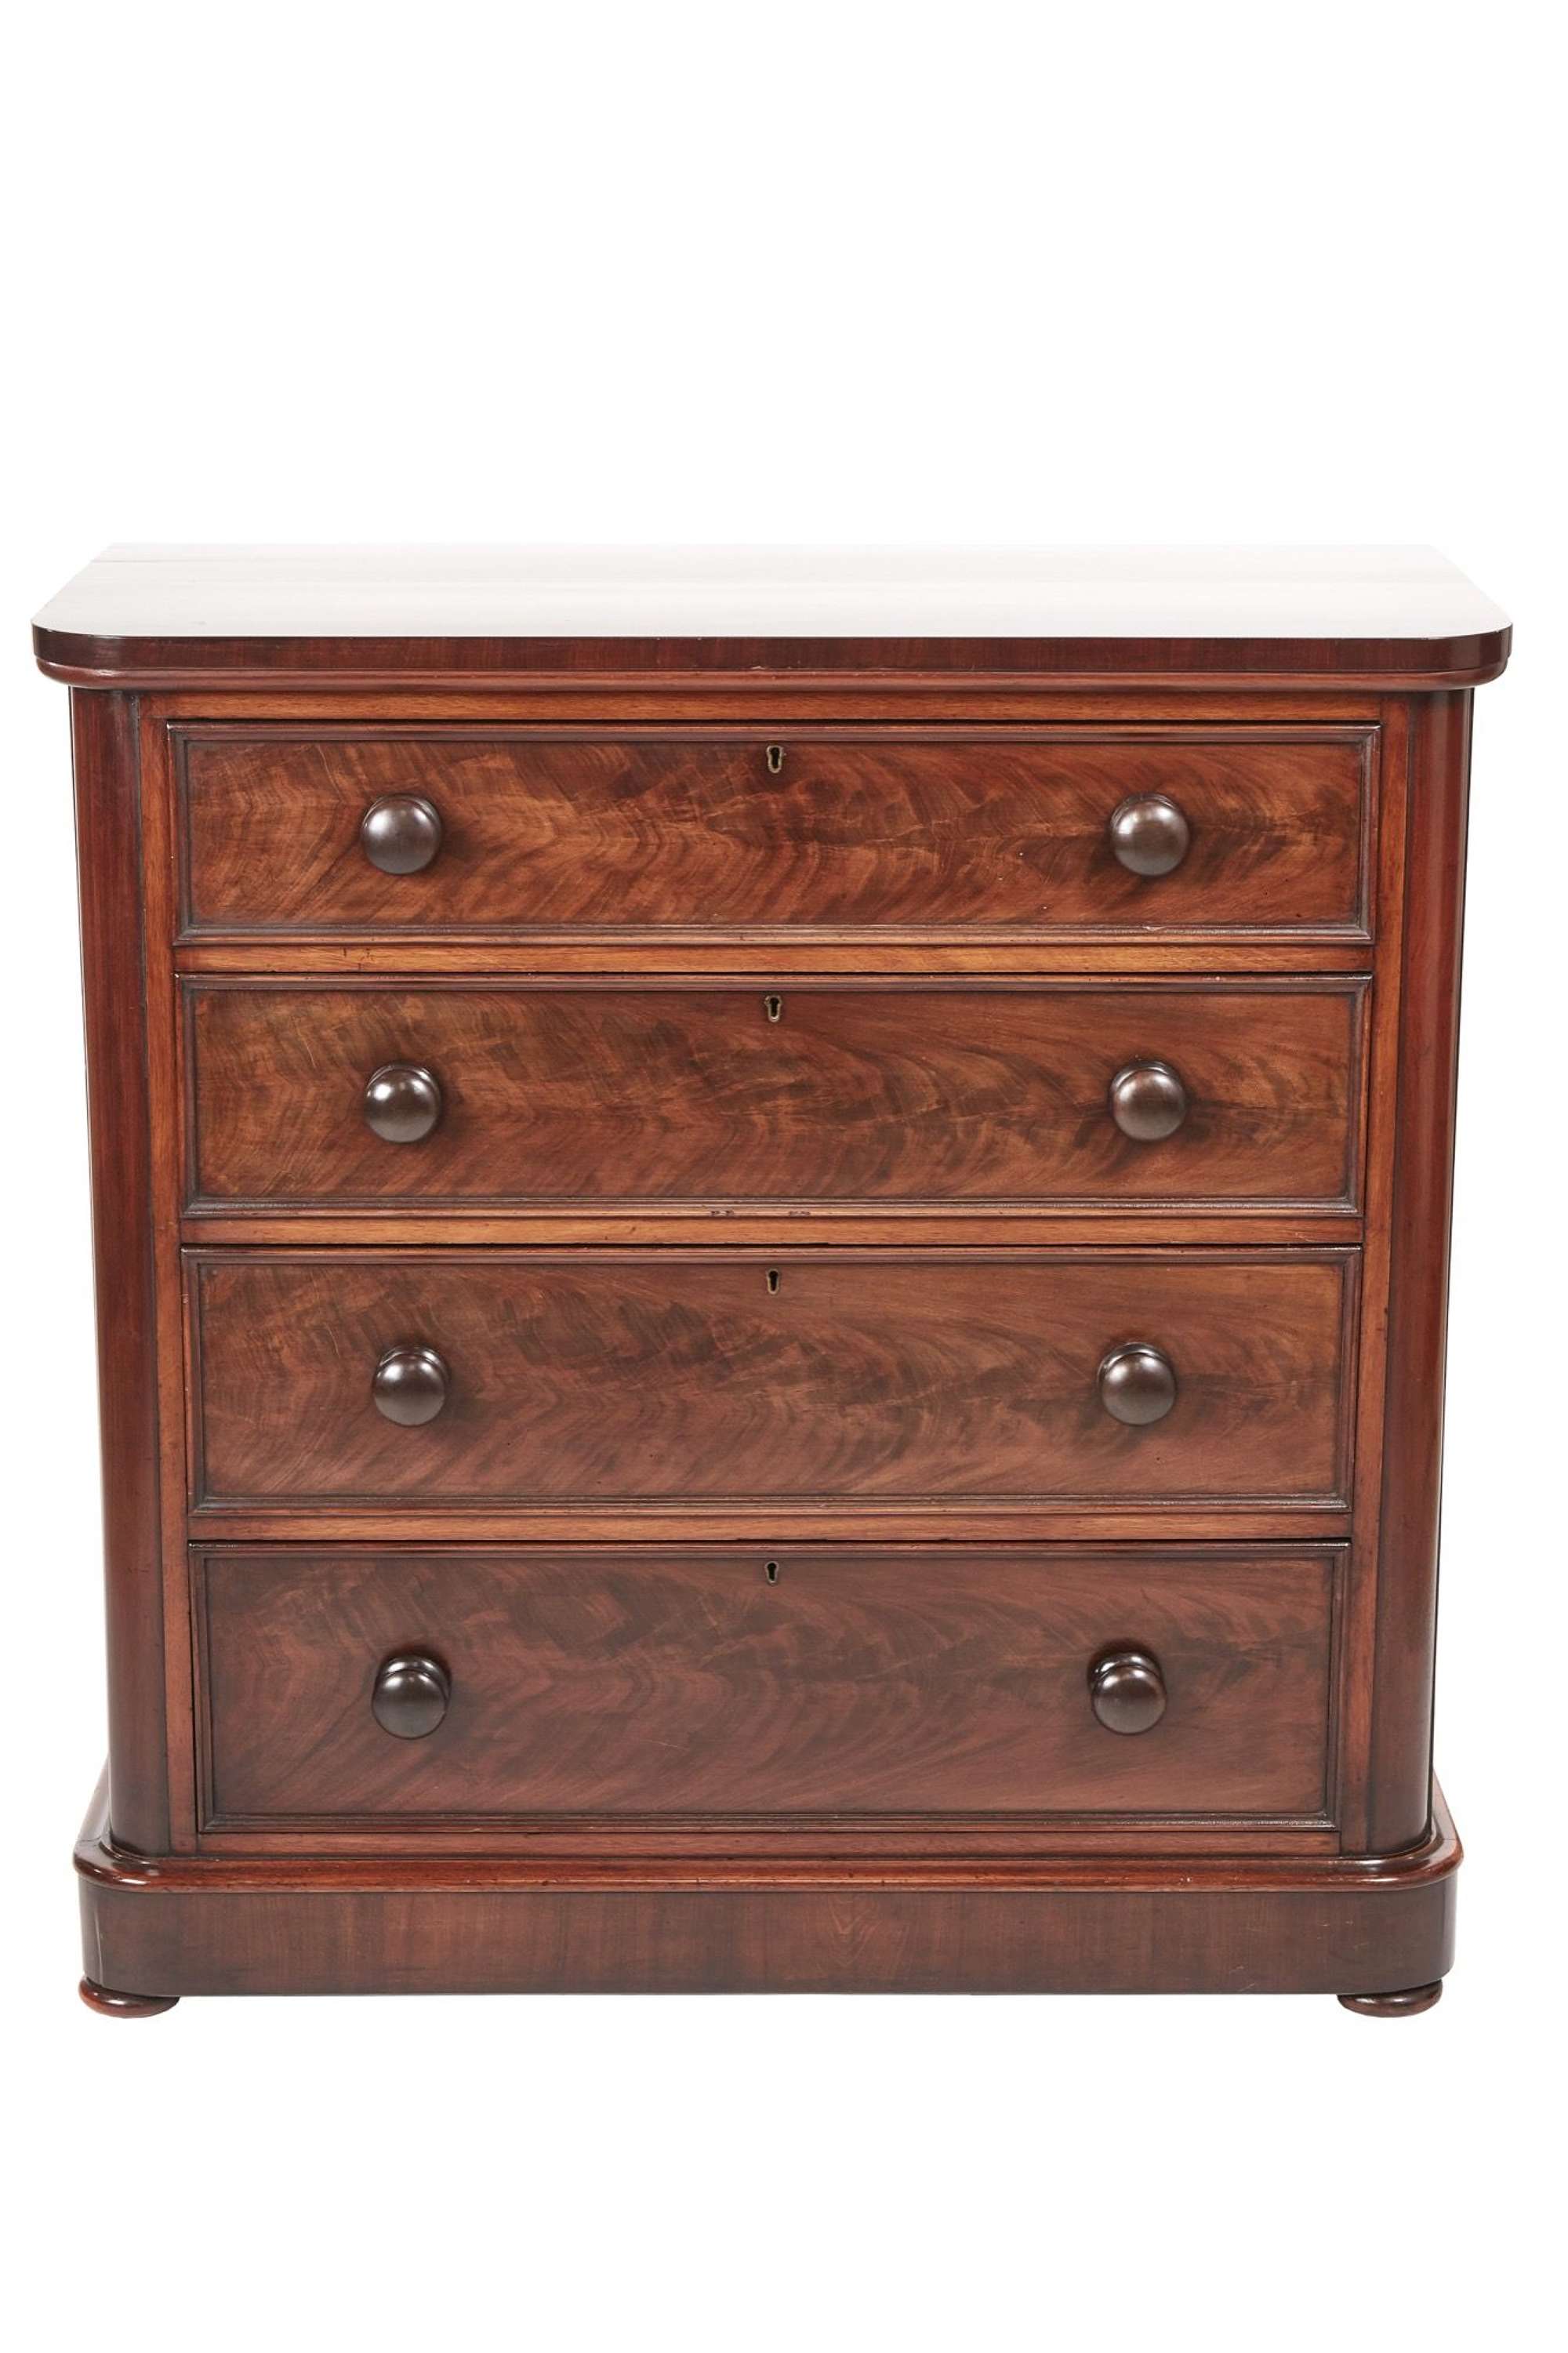 Antique Victorian Quality Mahogany Chest Of Drawers